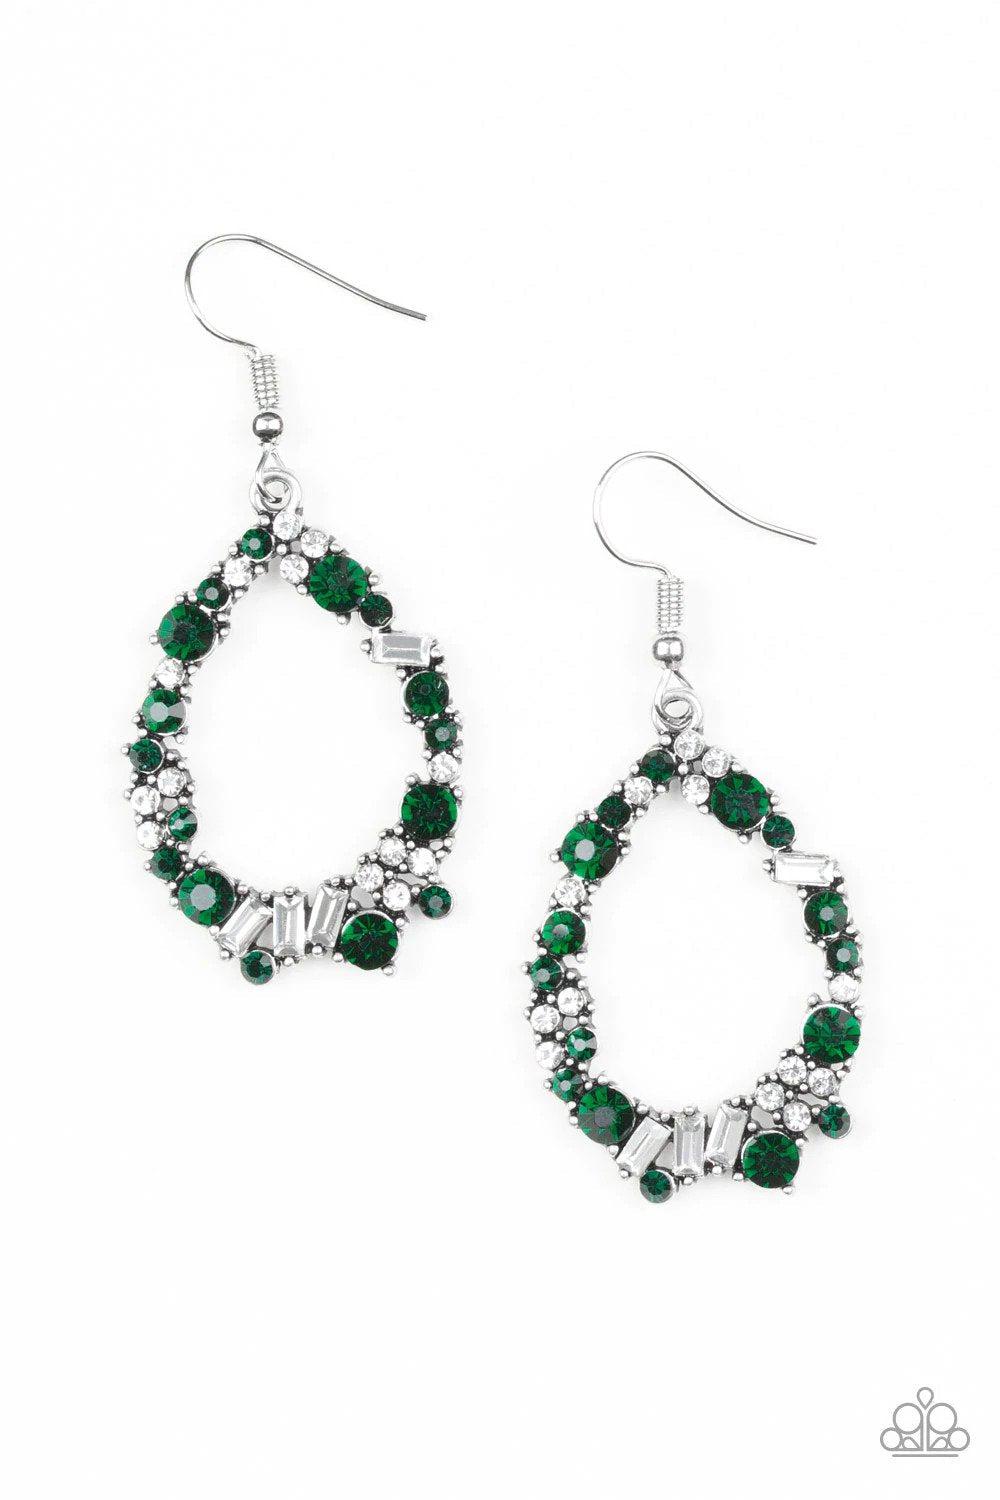 Crushing Couture Green Earrings - Paparazzi Accessories- lightbox - CarasShop.com - $5 Jewelry by Cara Jewels